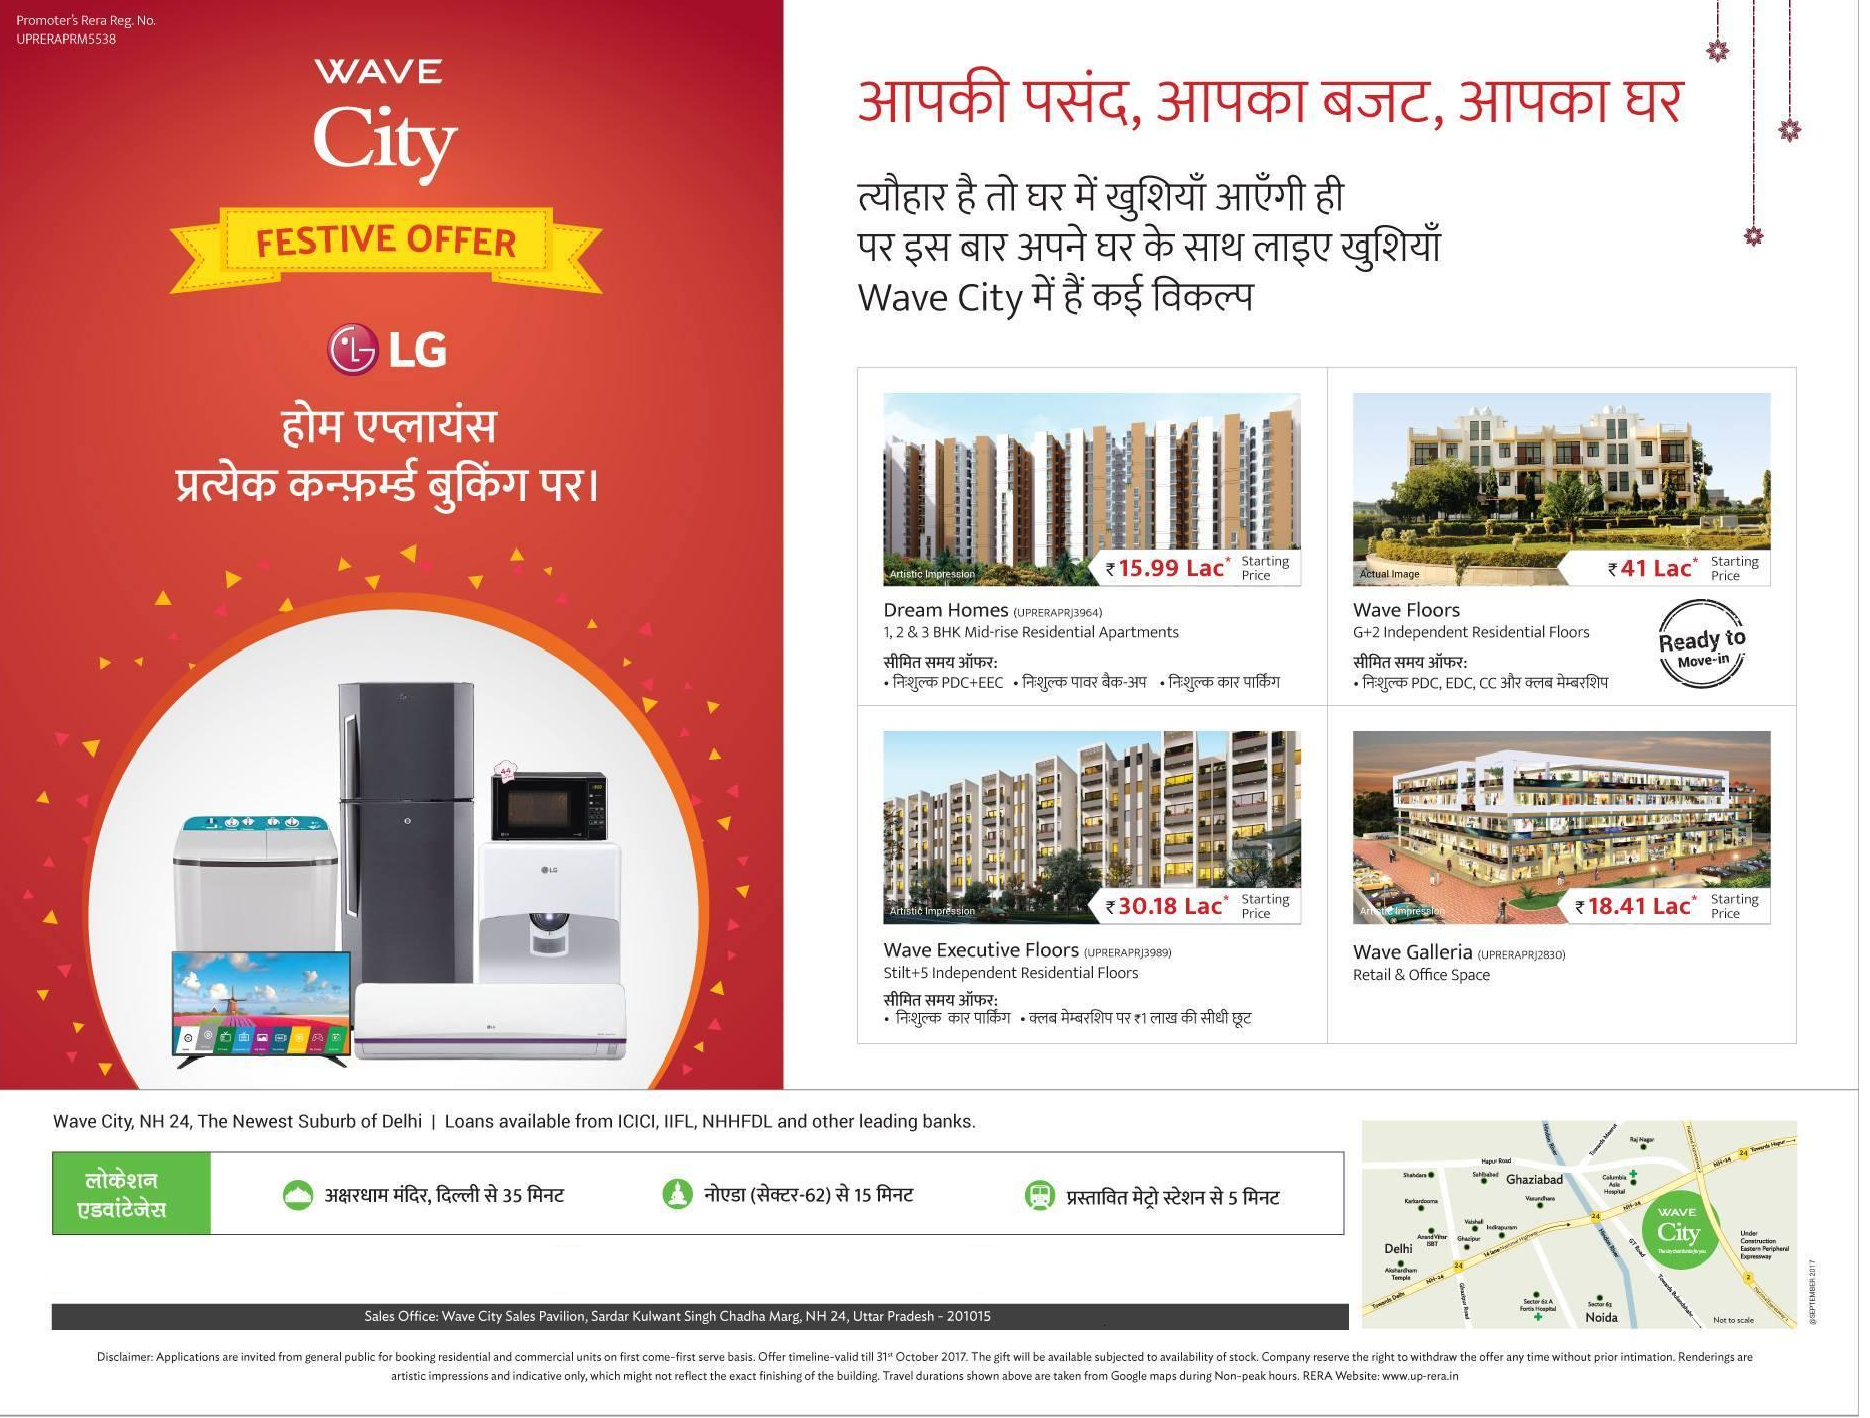 Wave City offers a chance to win LG home appliance with every confirmed booking in Greater Noida